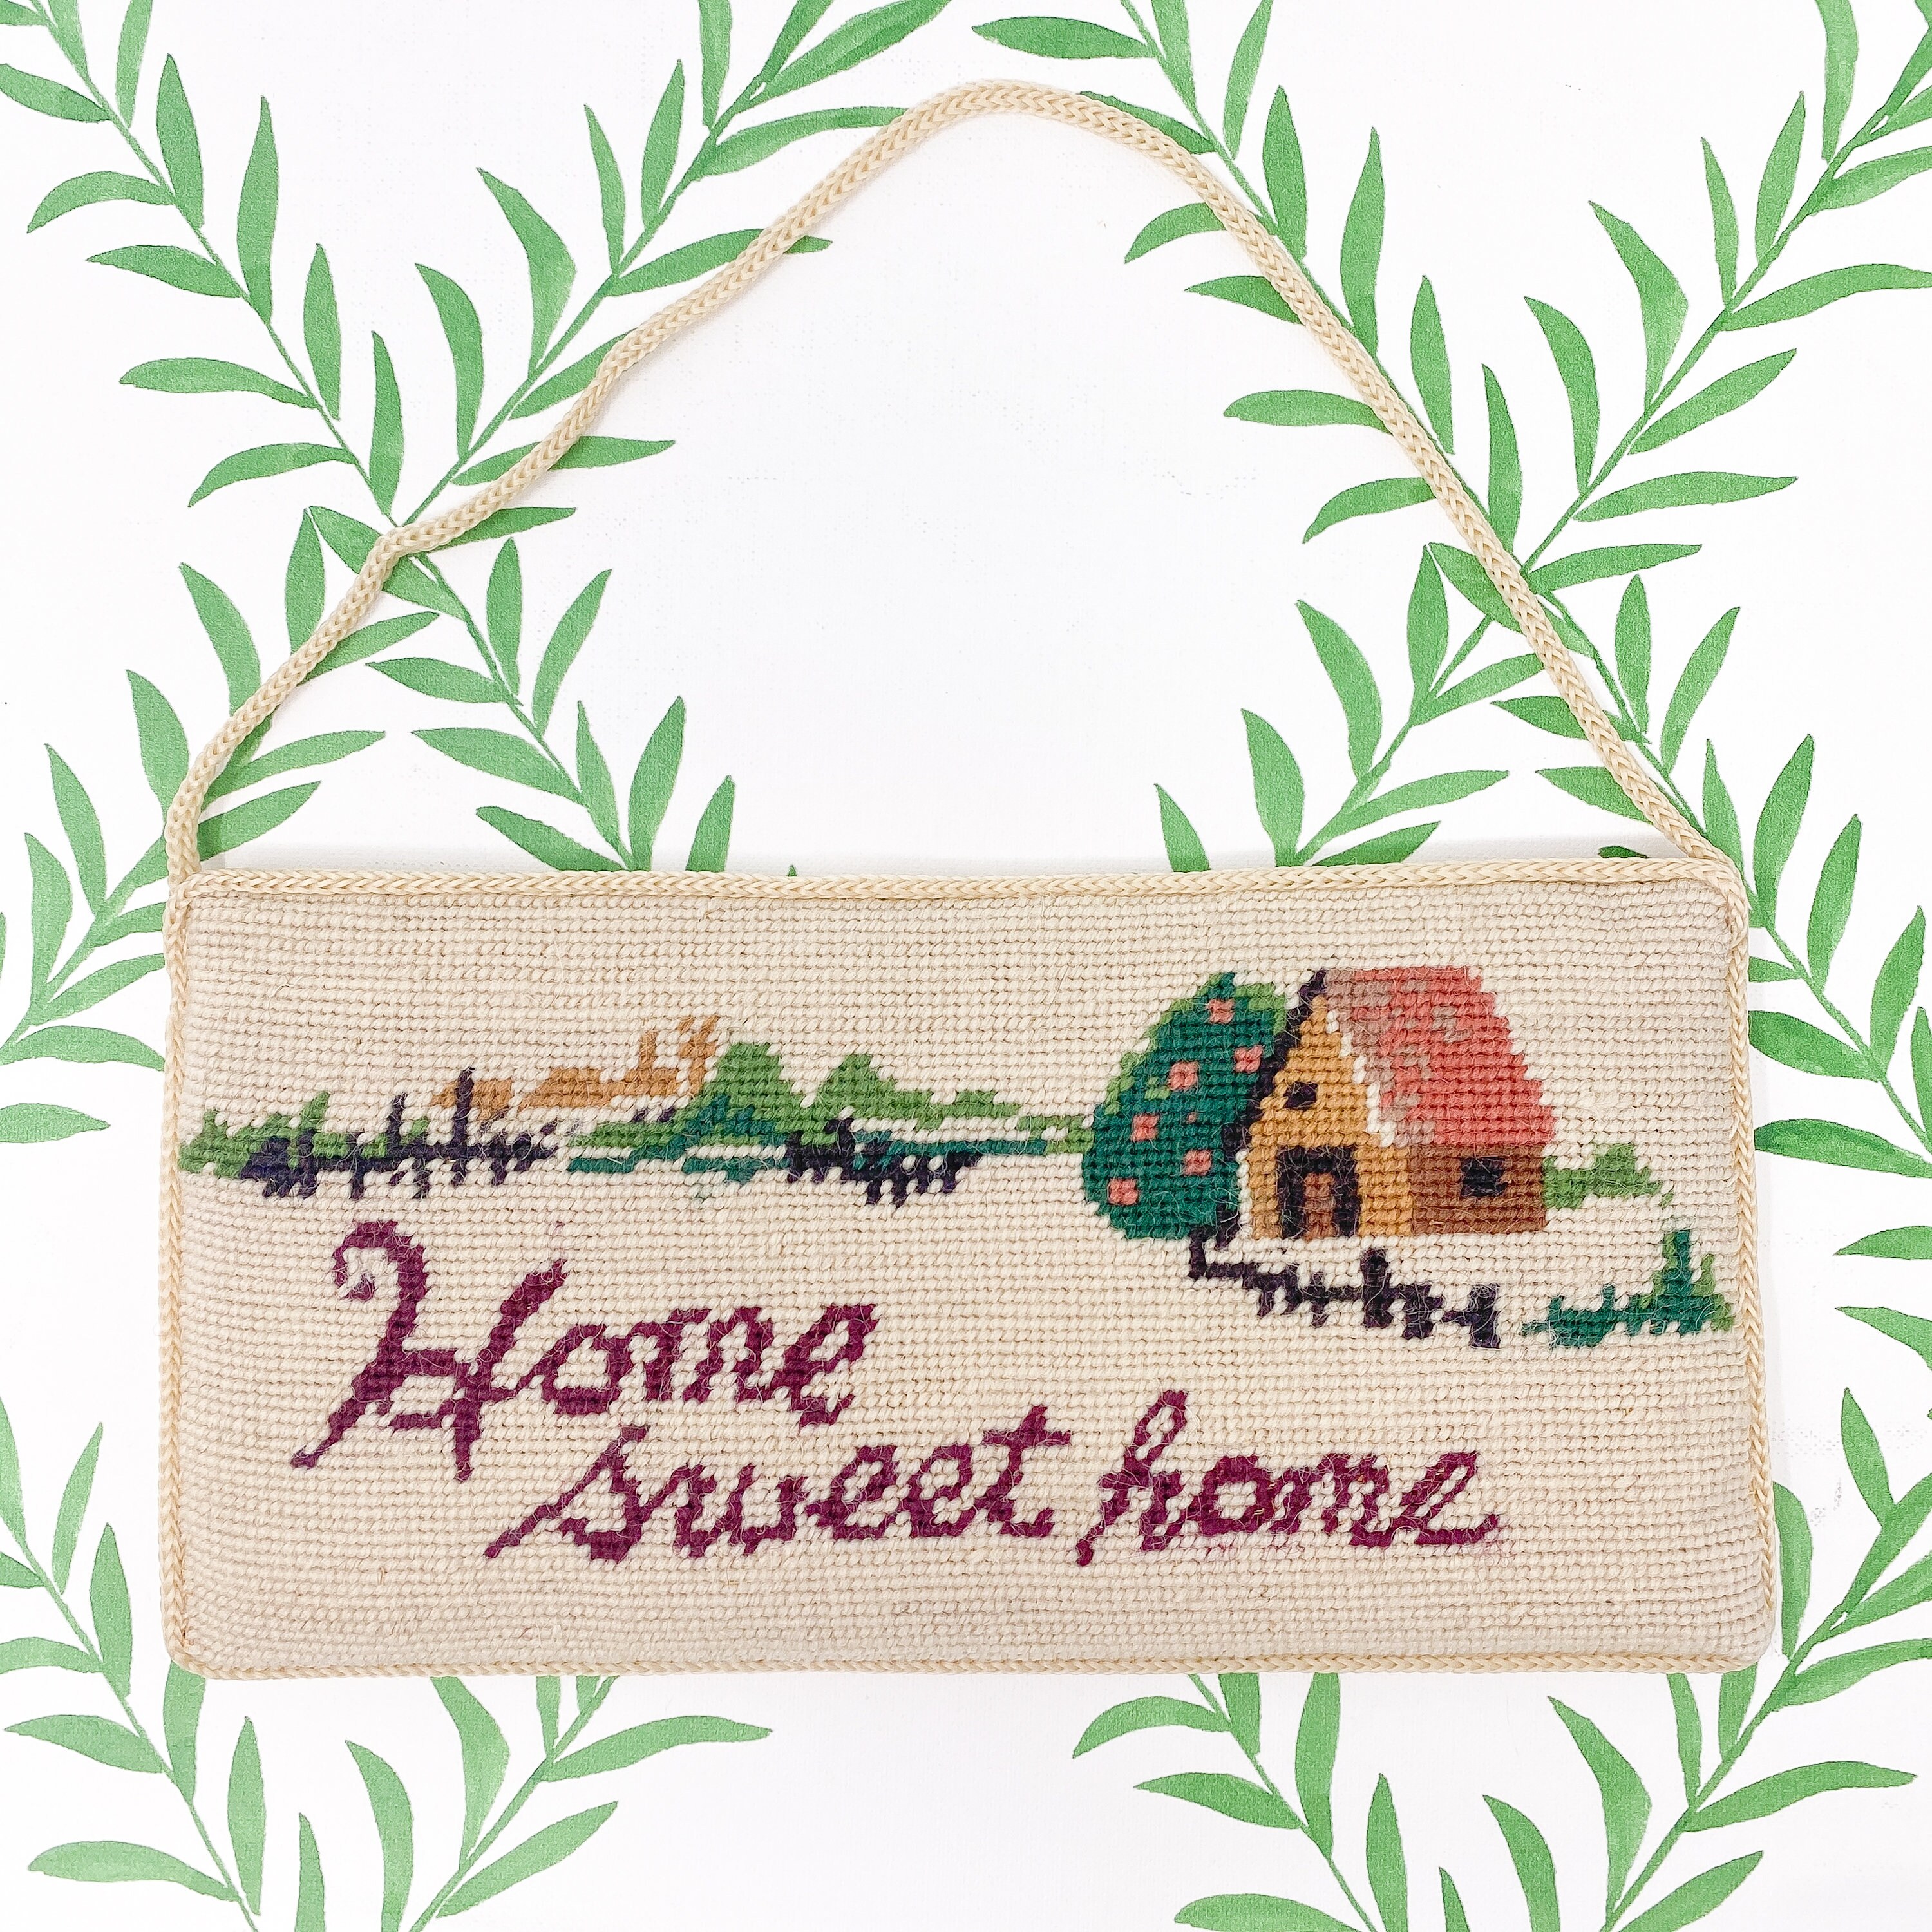 Embroidery Kit, Home Sweet Home, Beginner Embroidery Kit, Hand